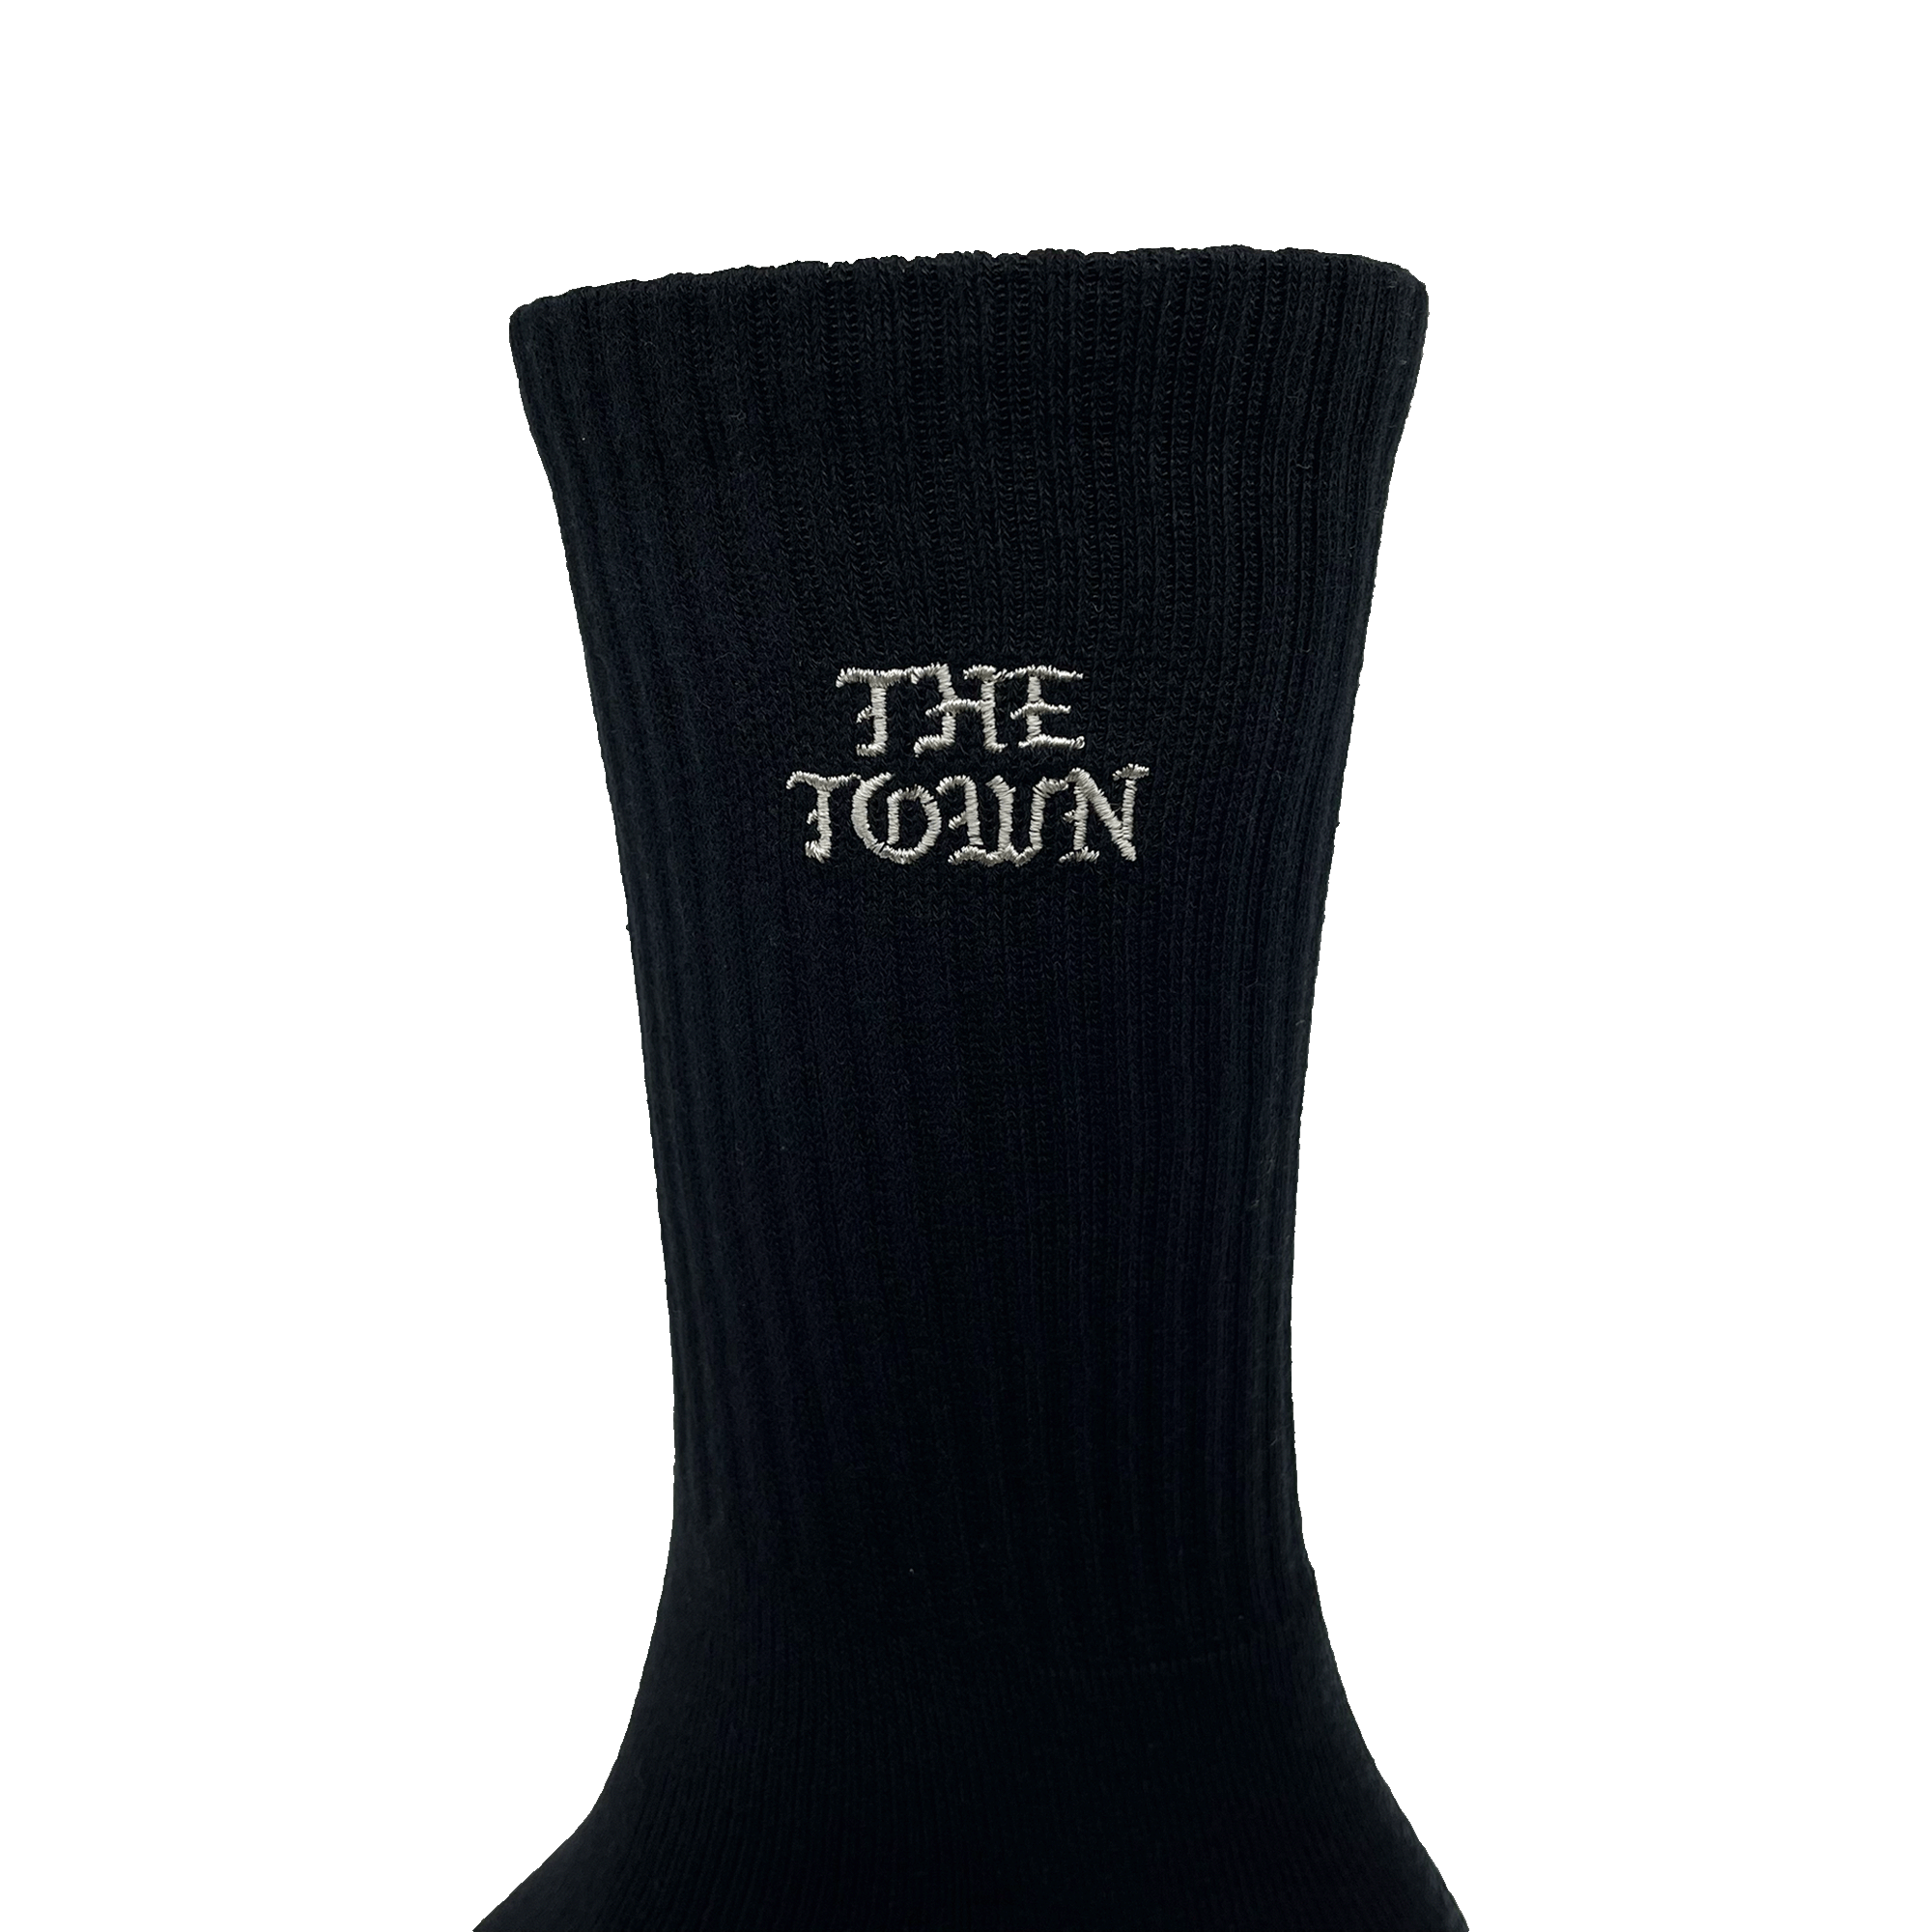 Close-up of embroidered white THE TOWN wordmark in Old Town English on the calves of black crew socks.